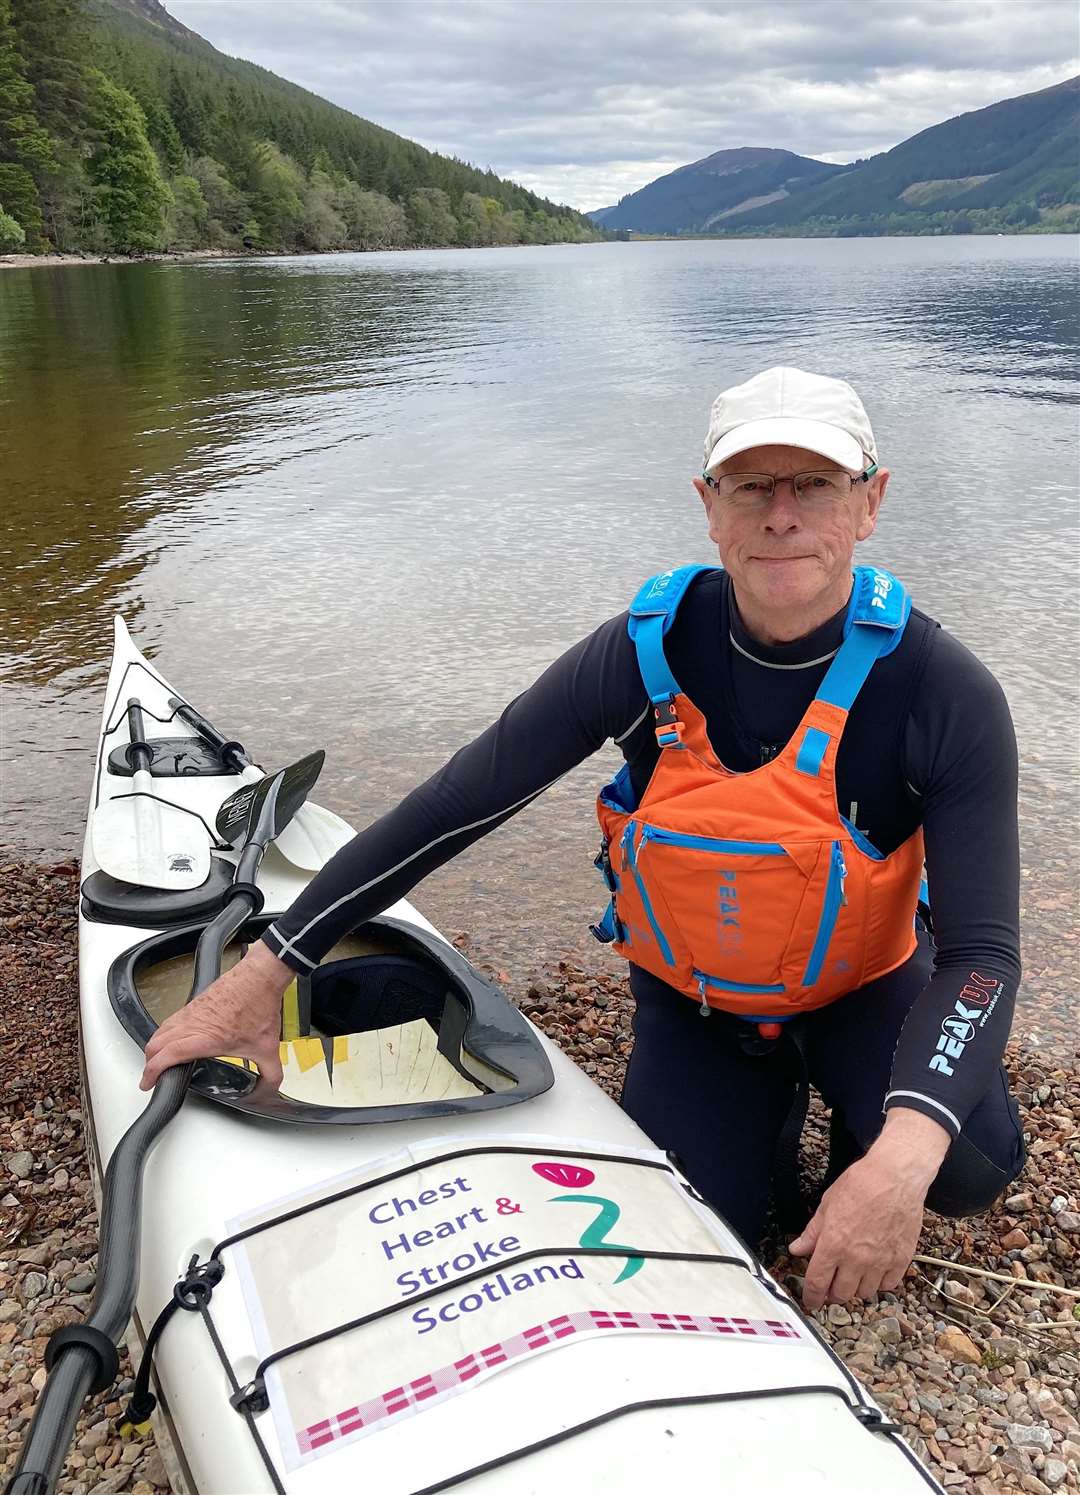 Dougals Sewell on Loch Lochy as part of his challenge.